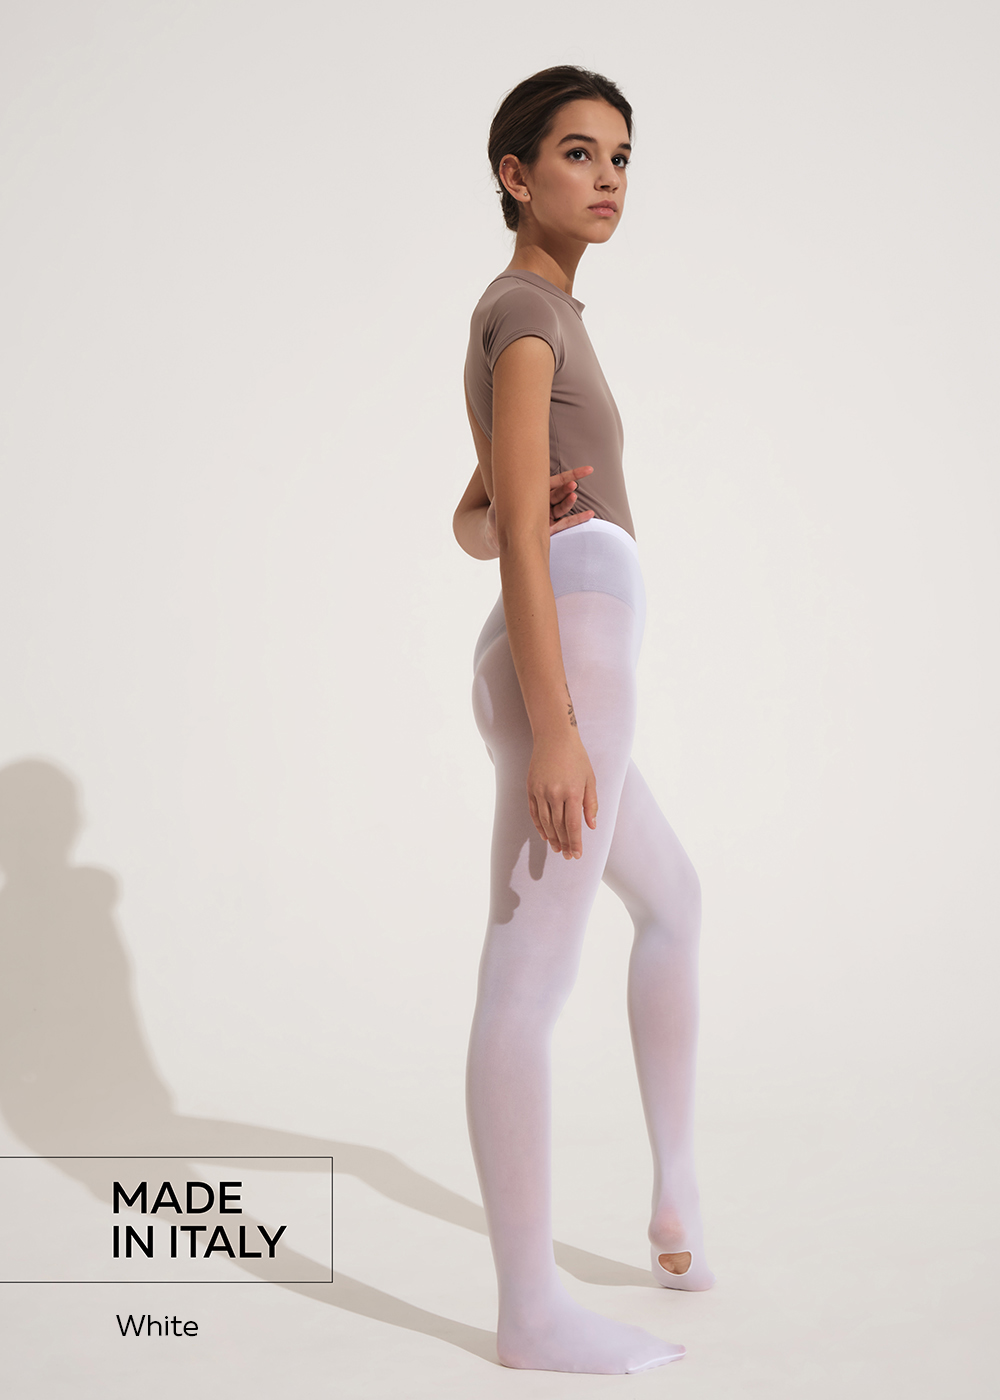 Cross – Off White Tights